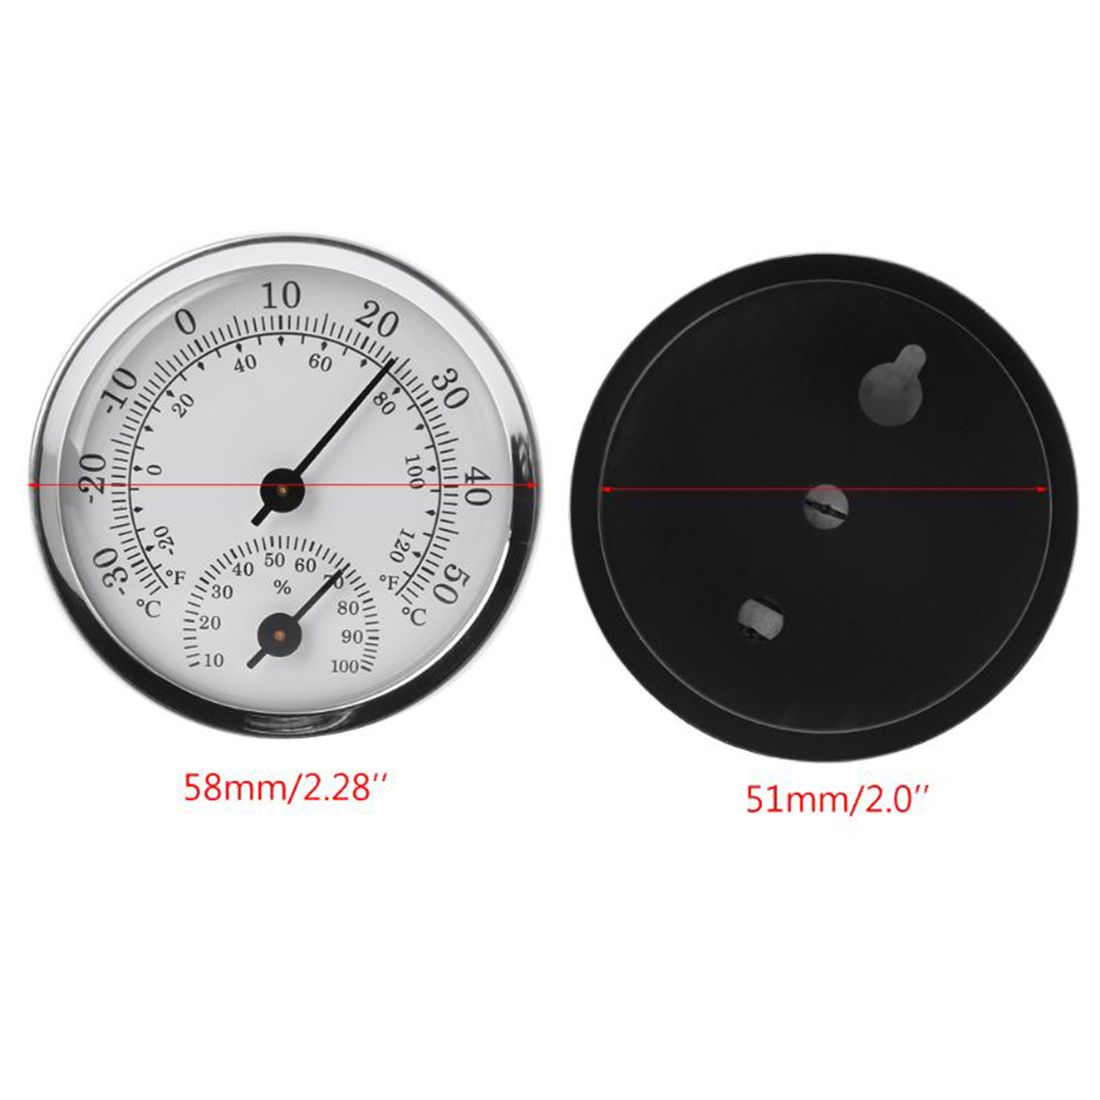 58mm-Wall-Mounted-Thermometer-Hygrometer-Portable-Mini-Humidity-And-Temperature-Meter-Gauge-for-Room-1683252